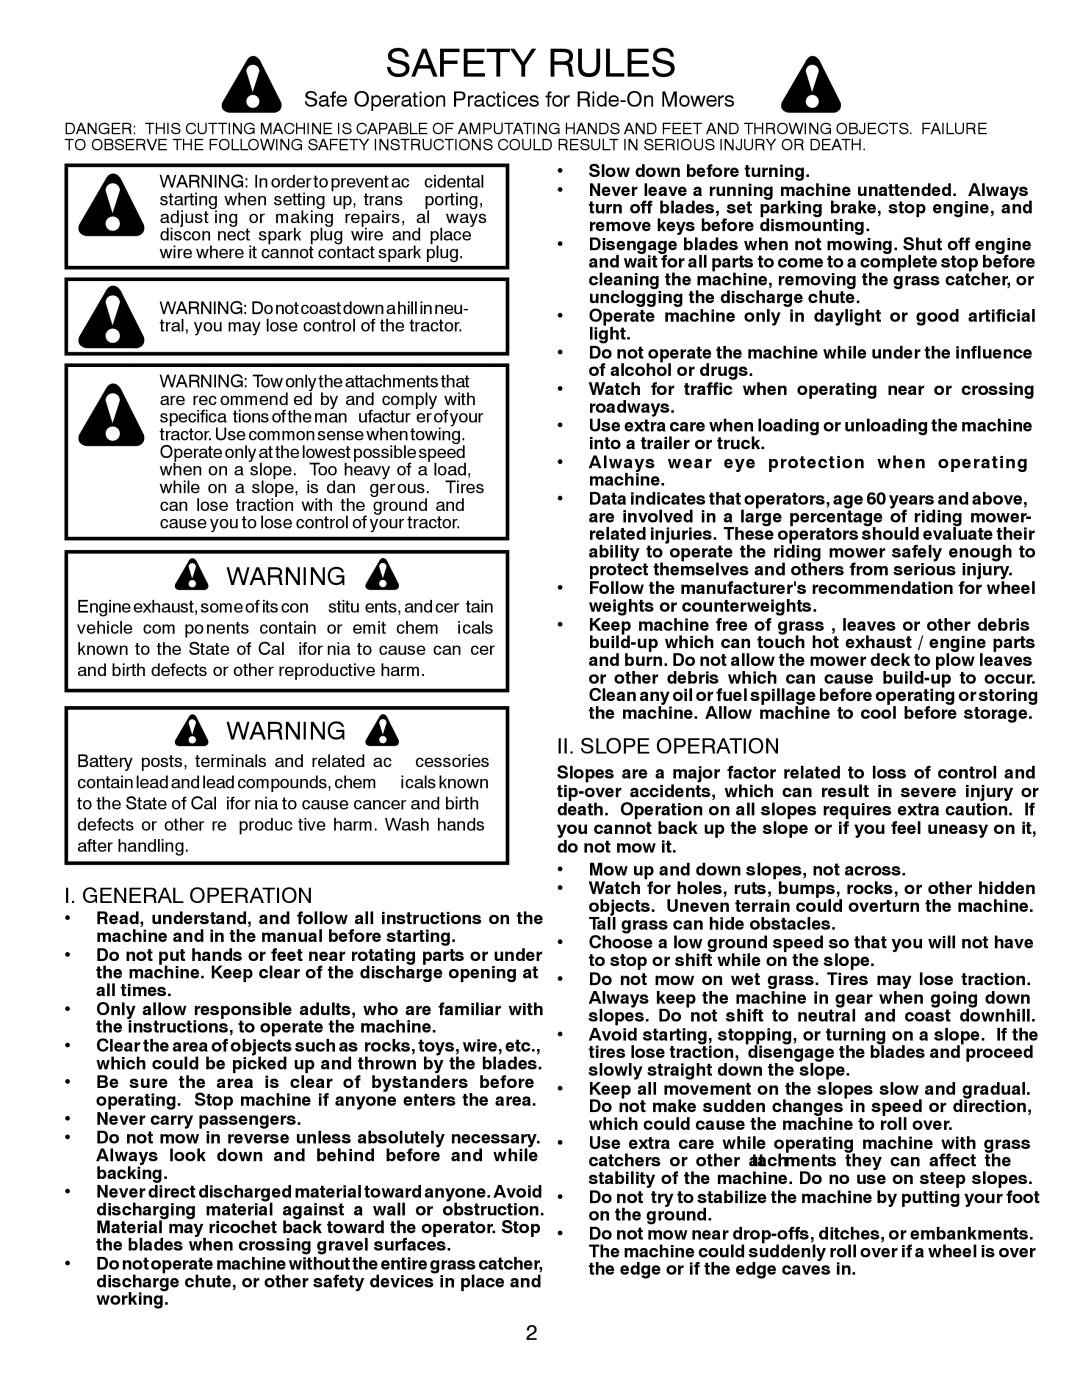 Husqvarna LGTH2454 Safety Rules, Safe Operation Practices for Ride-On Mowers, General Operation, II. Slope Operation 